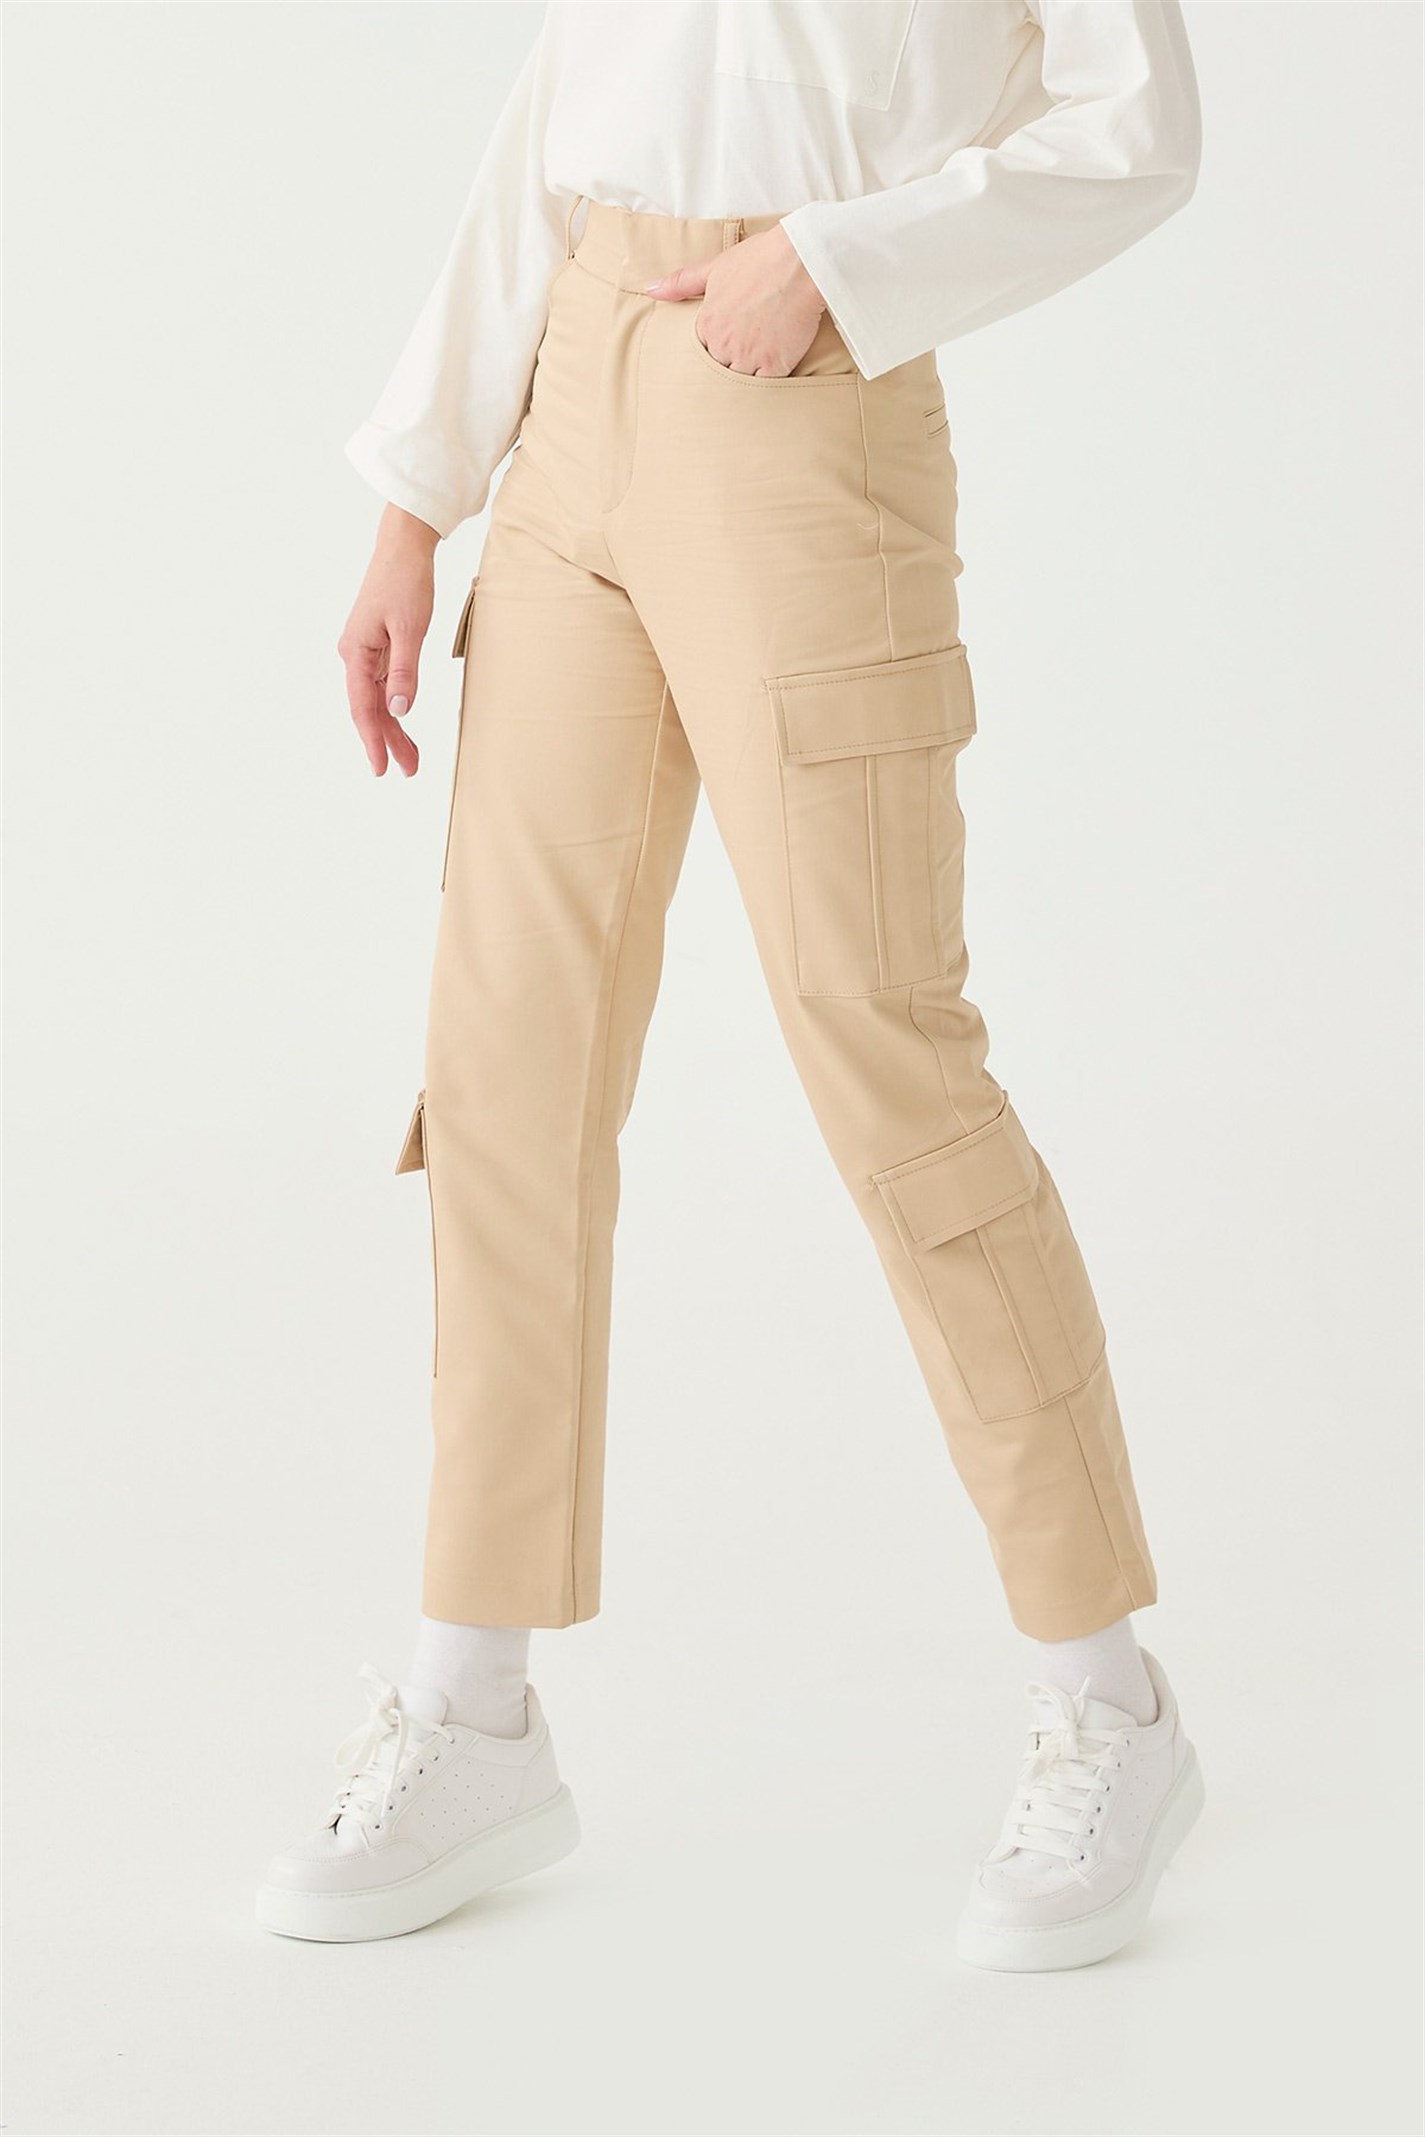 Camel Cargo Pants | Suud Collection